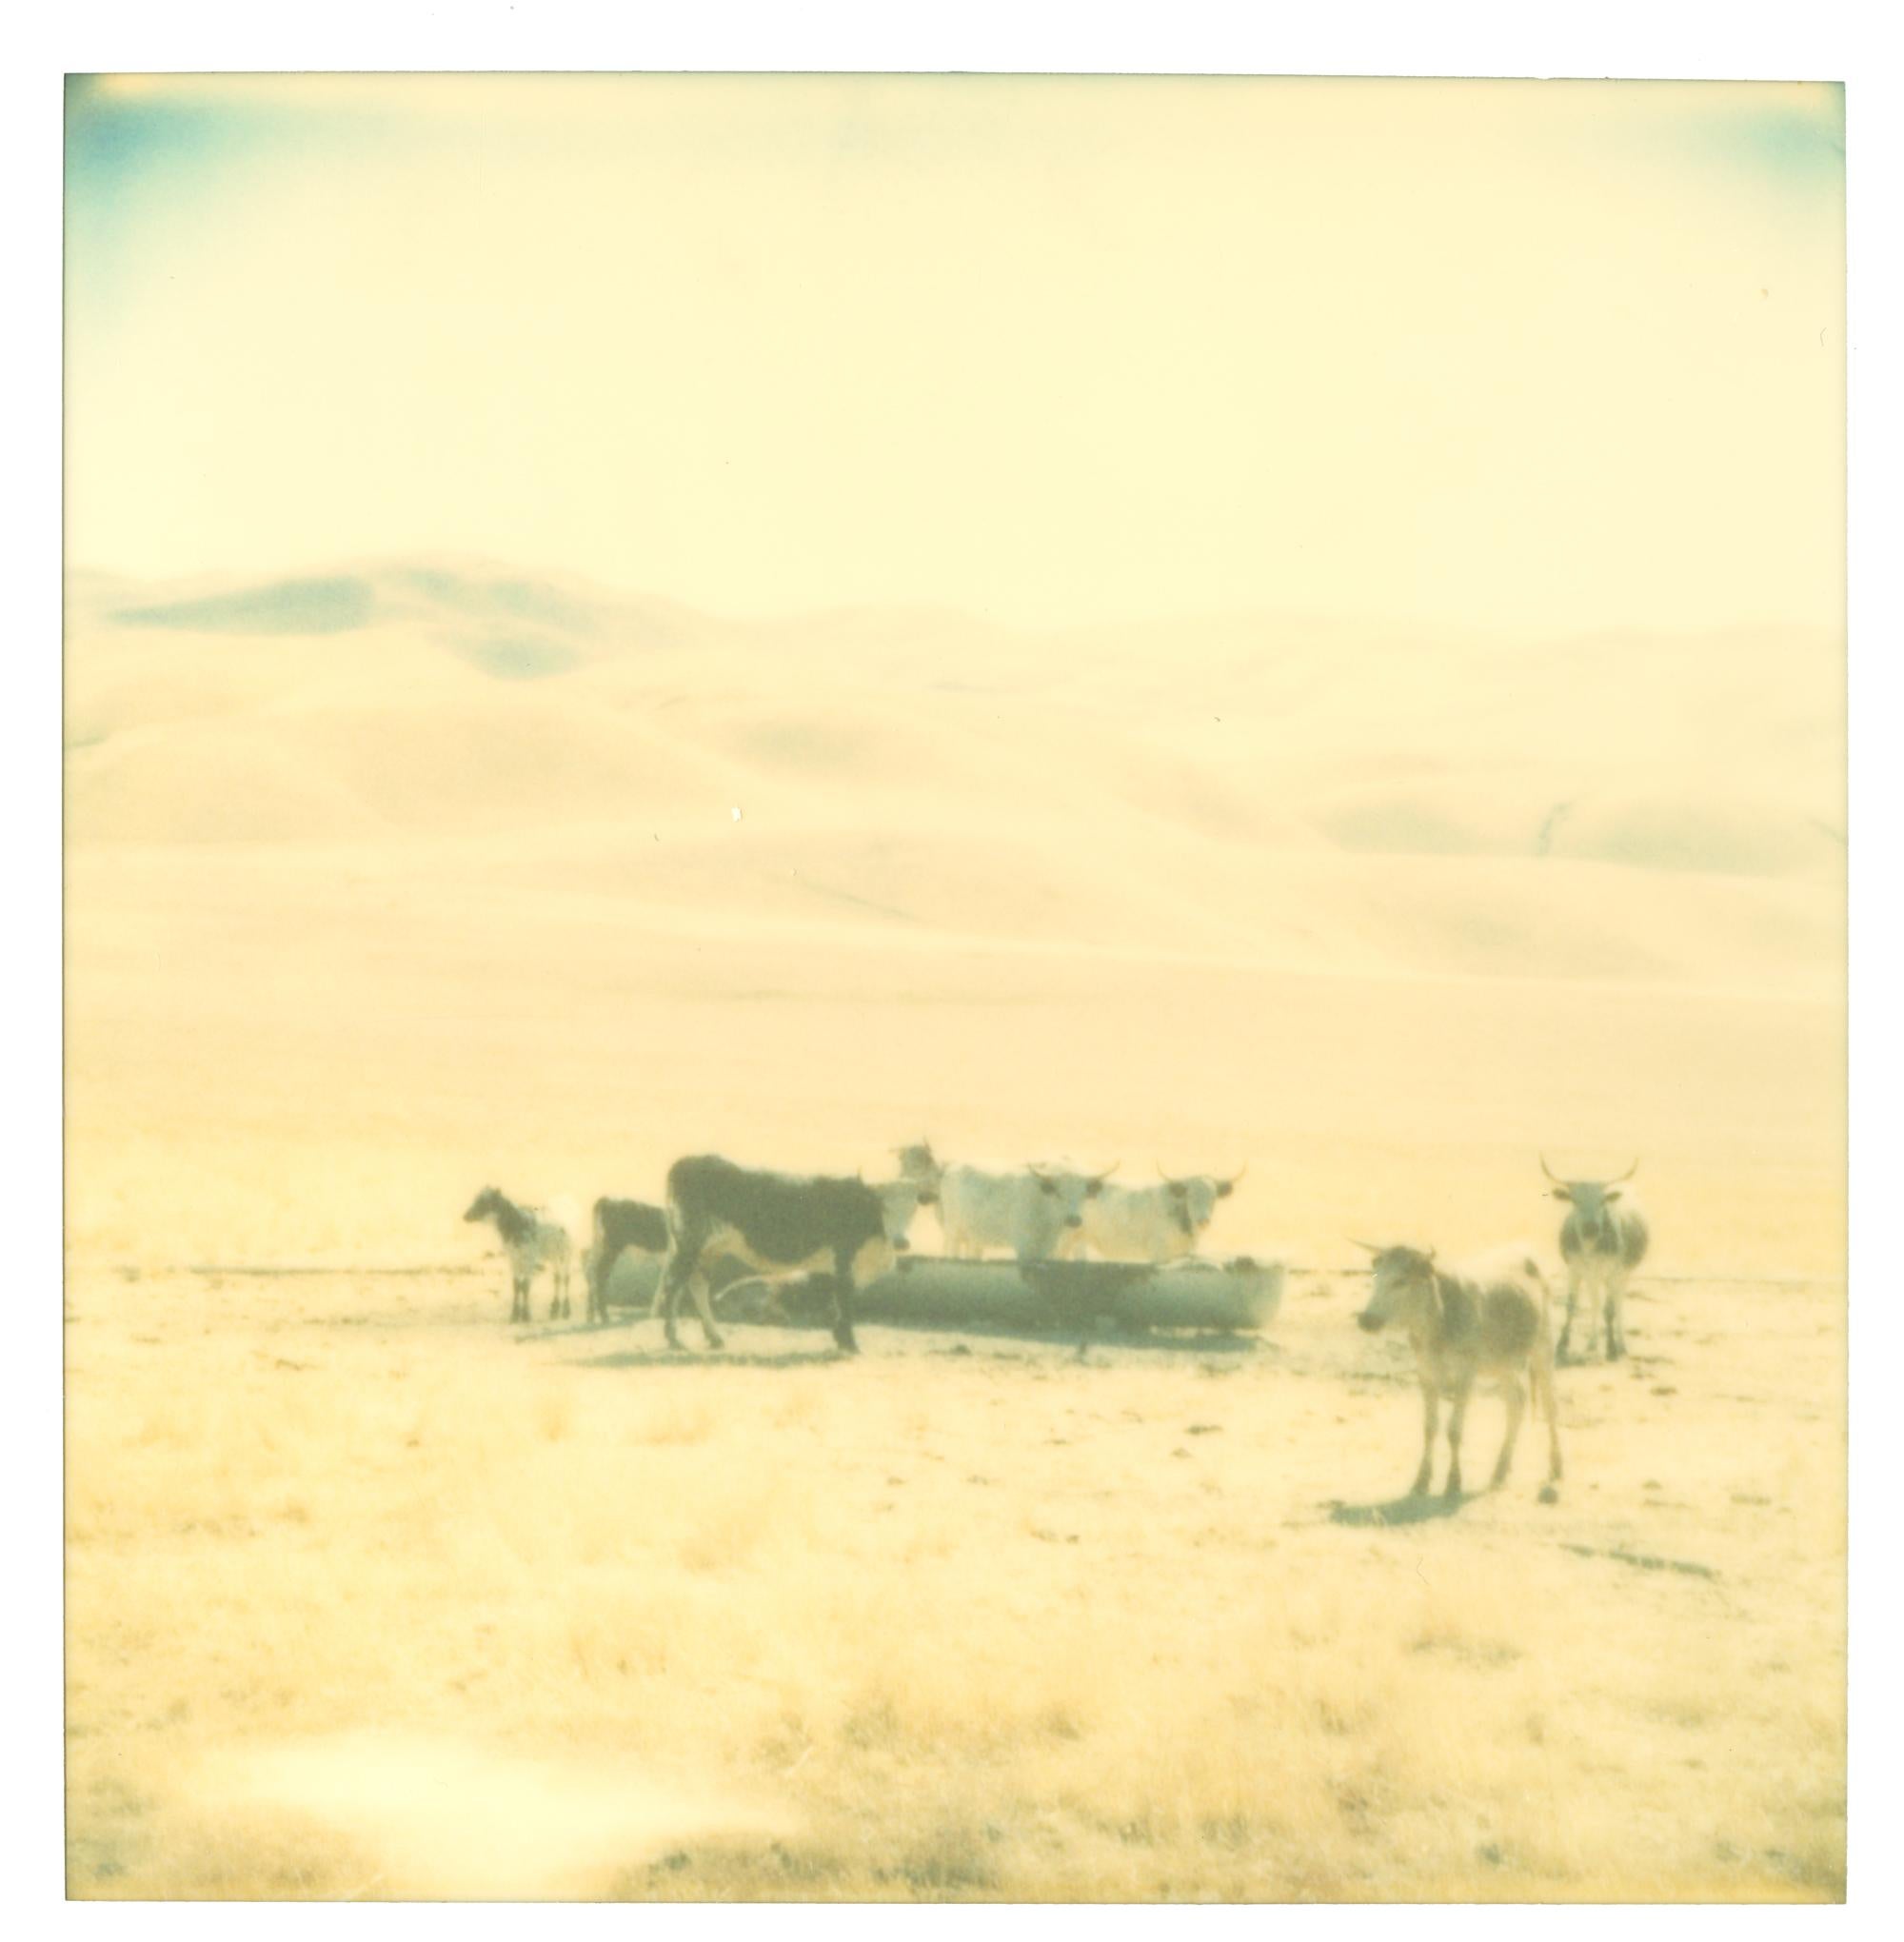 Untitled (Oilfields)
2004, 60x60cm each, installed 60x200cm, Edition 6/10. 
Analog C-Print,s based on an expired Polaroids.
Certificate and Signature label. 
Artist Inventory No 1212.07.
Not mounted.

Exhibited at Susanne Vielmetter, LA Projects,